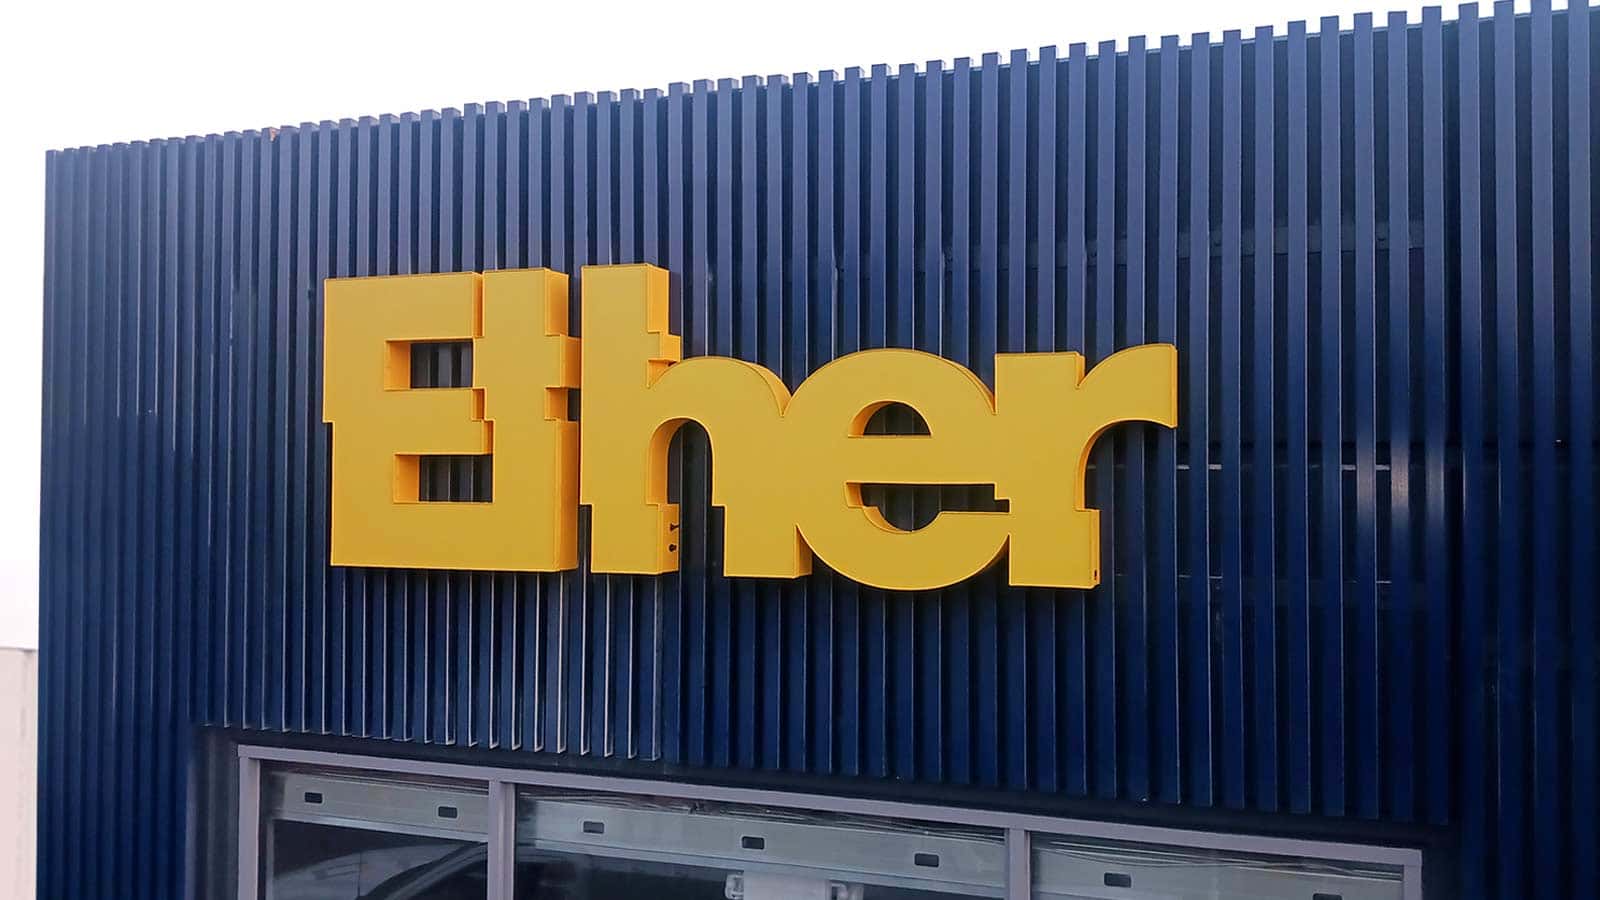 Ether high rise sign on the exterior metallic construction